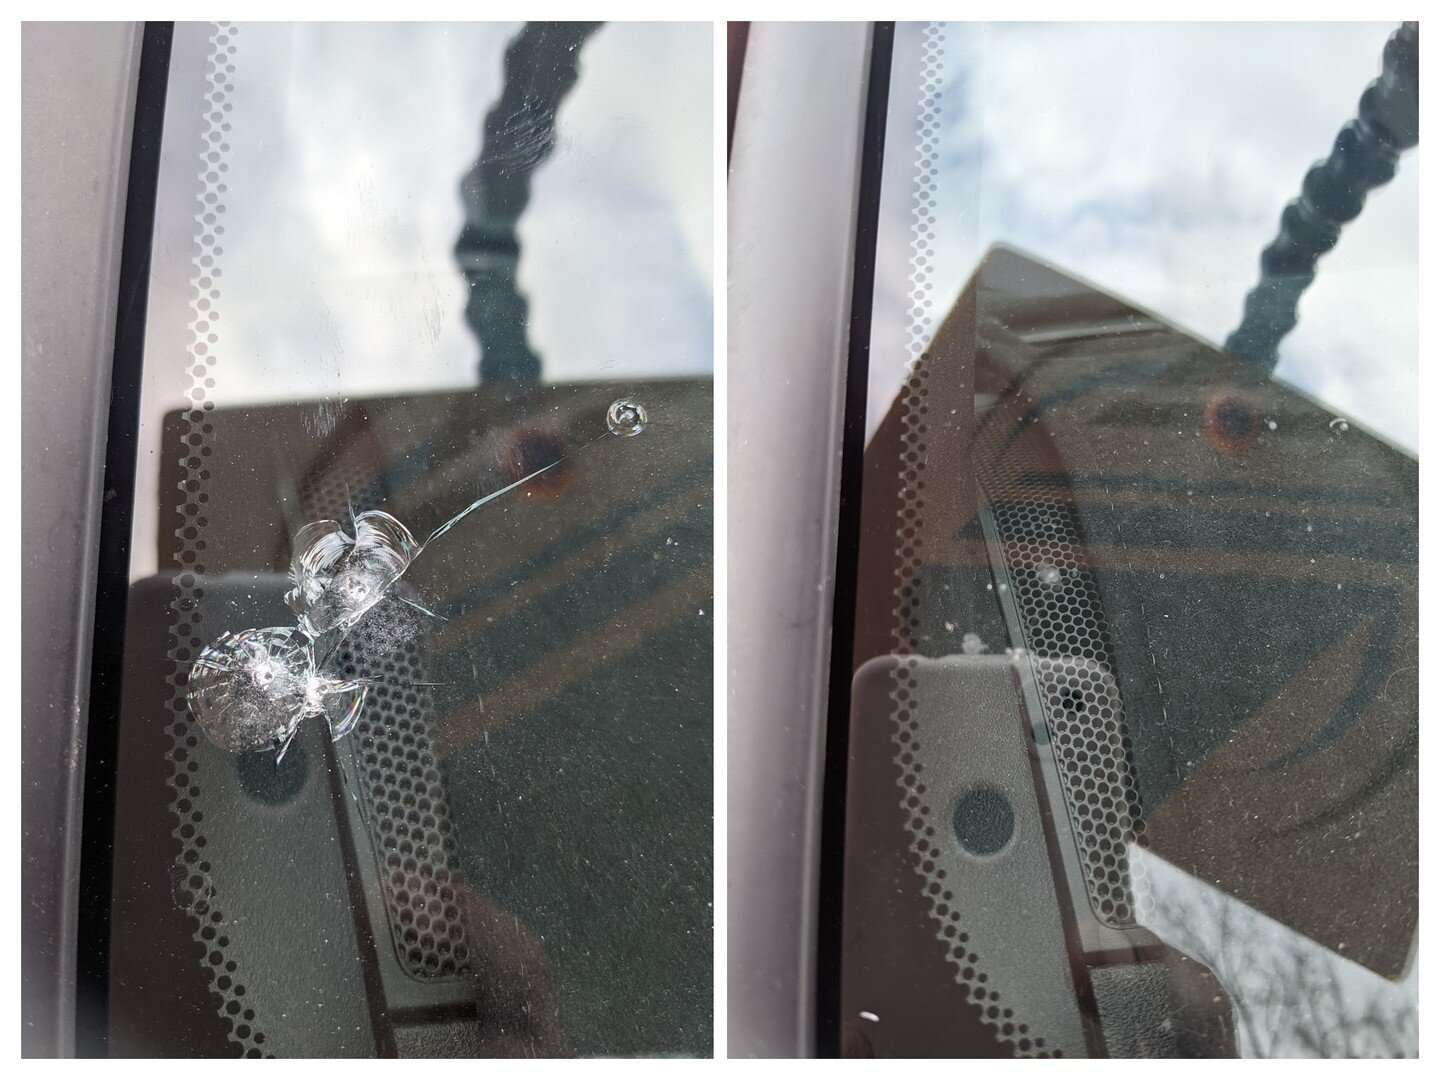 Two Rock chips with a leg about 2 in in length. Before and after windshield repair.

&bull;
&bull;
&bull;
#snowbird #saltLake #windshieldrepairsaltlake #downtownsaltLake #saltlakecity #saltlakecityutah #murrayutah #sugerhouse #booking.cracks-chips.co